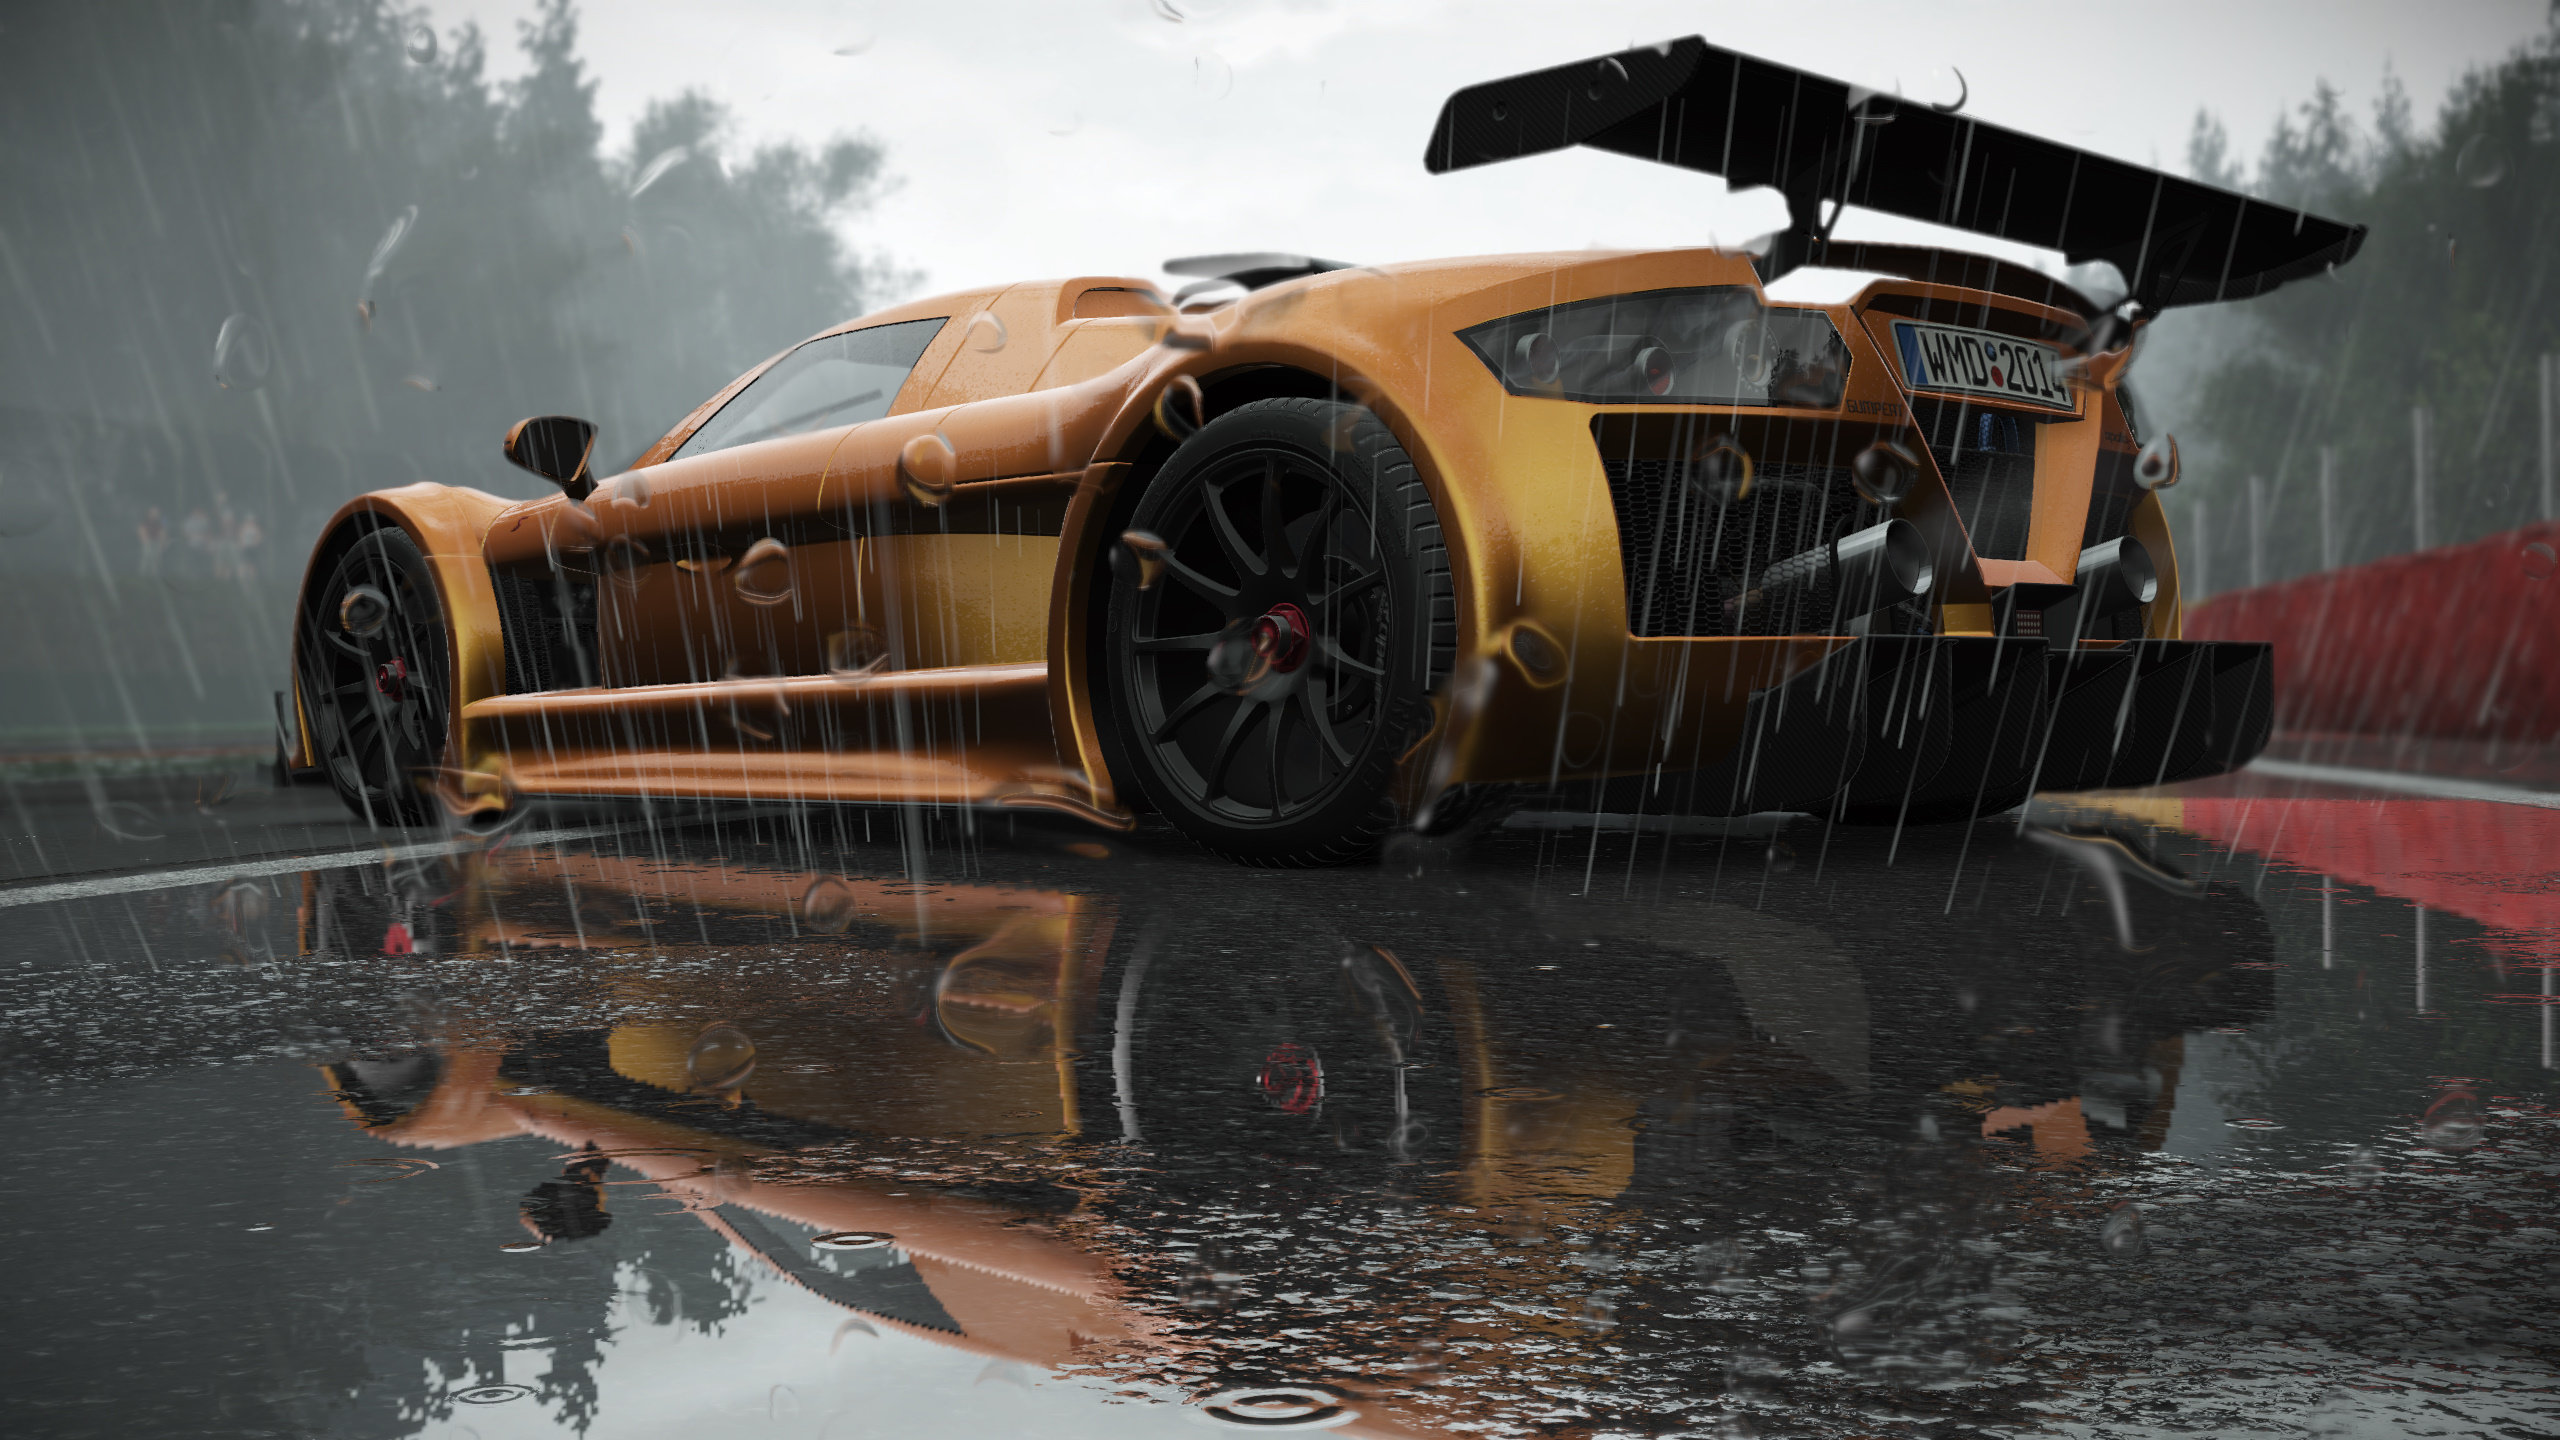 Awesome Project Cars free background ID:65856 for hd 2560x1440 PC